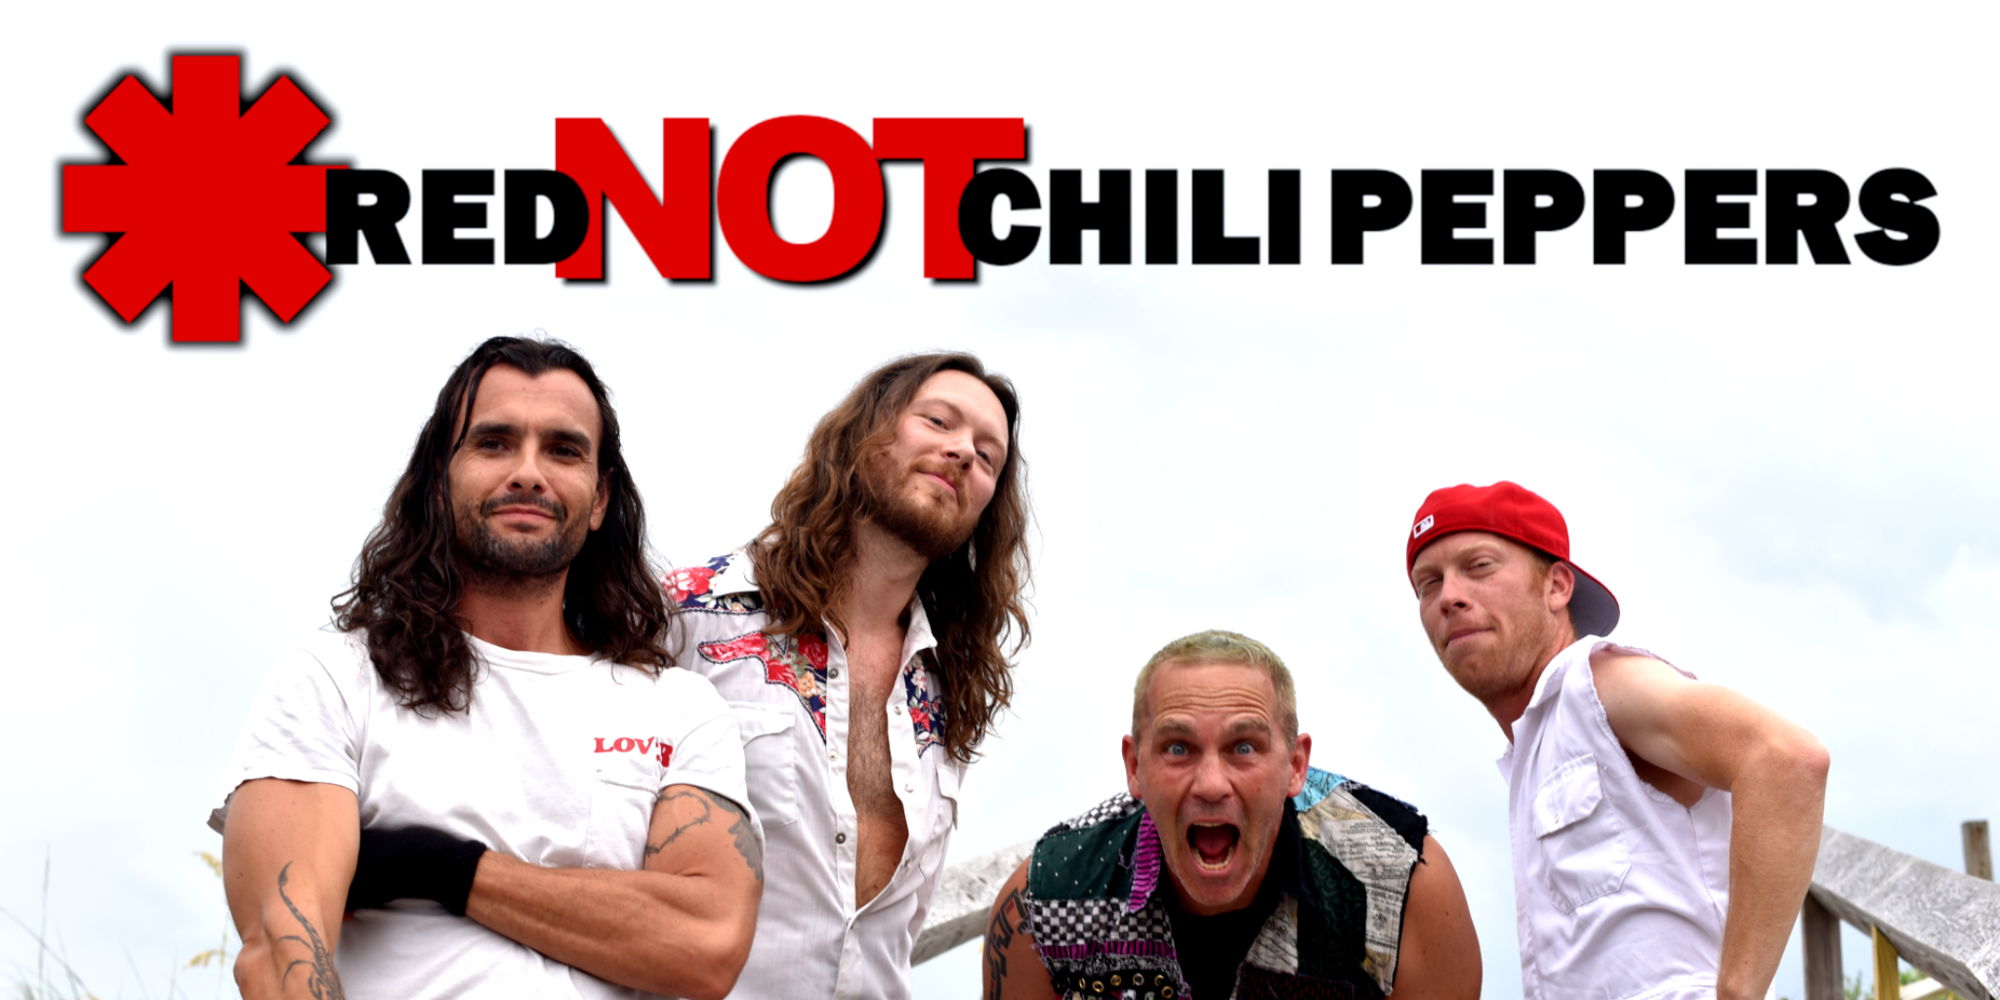 Red Not Chili Peppers: The Ultimate Red Hot Chili Peppers Tribute at Elevation 27 promotional image